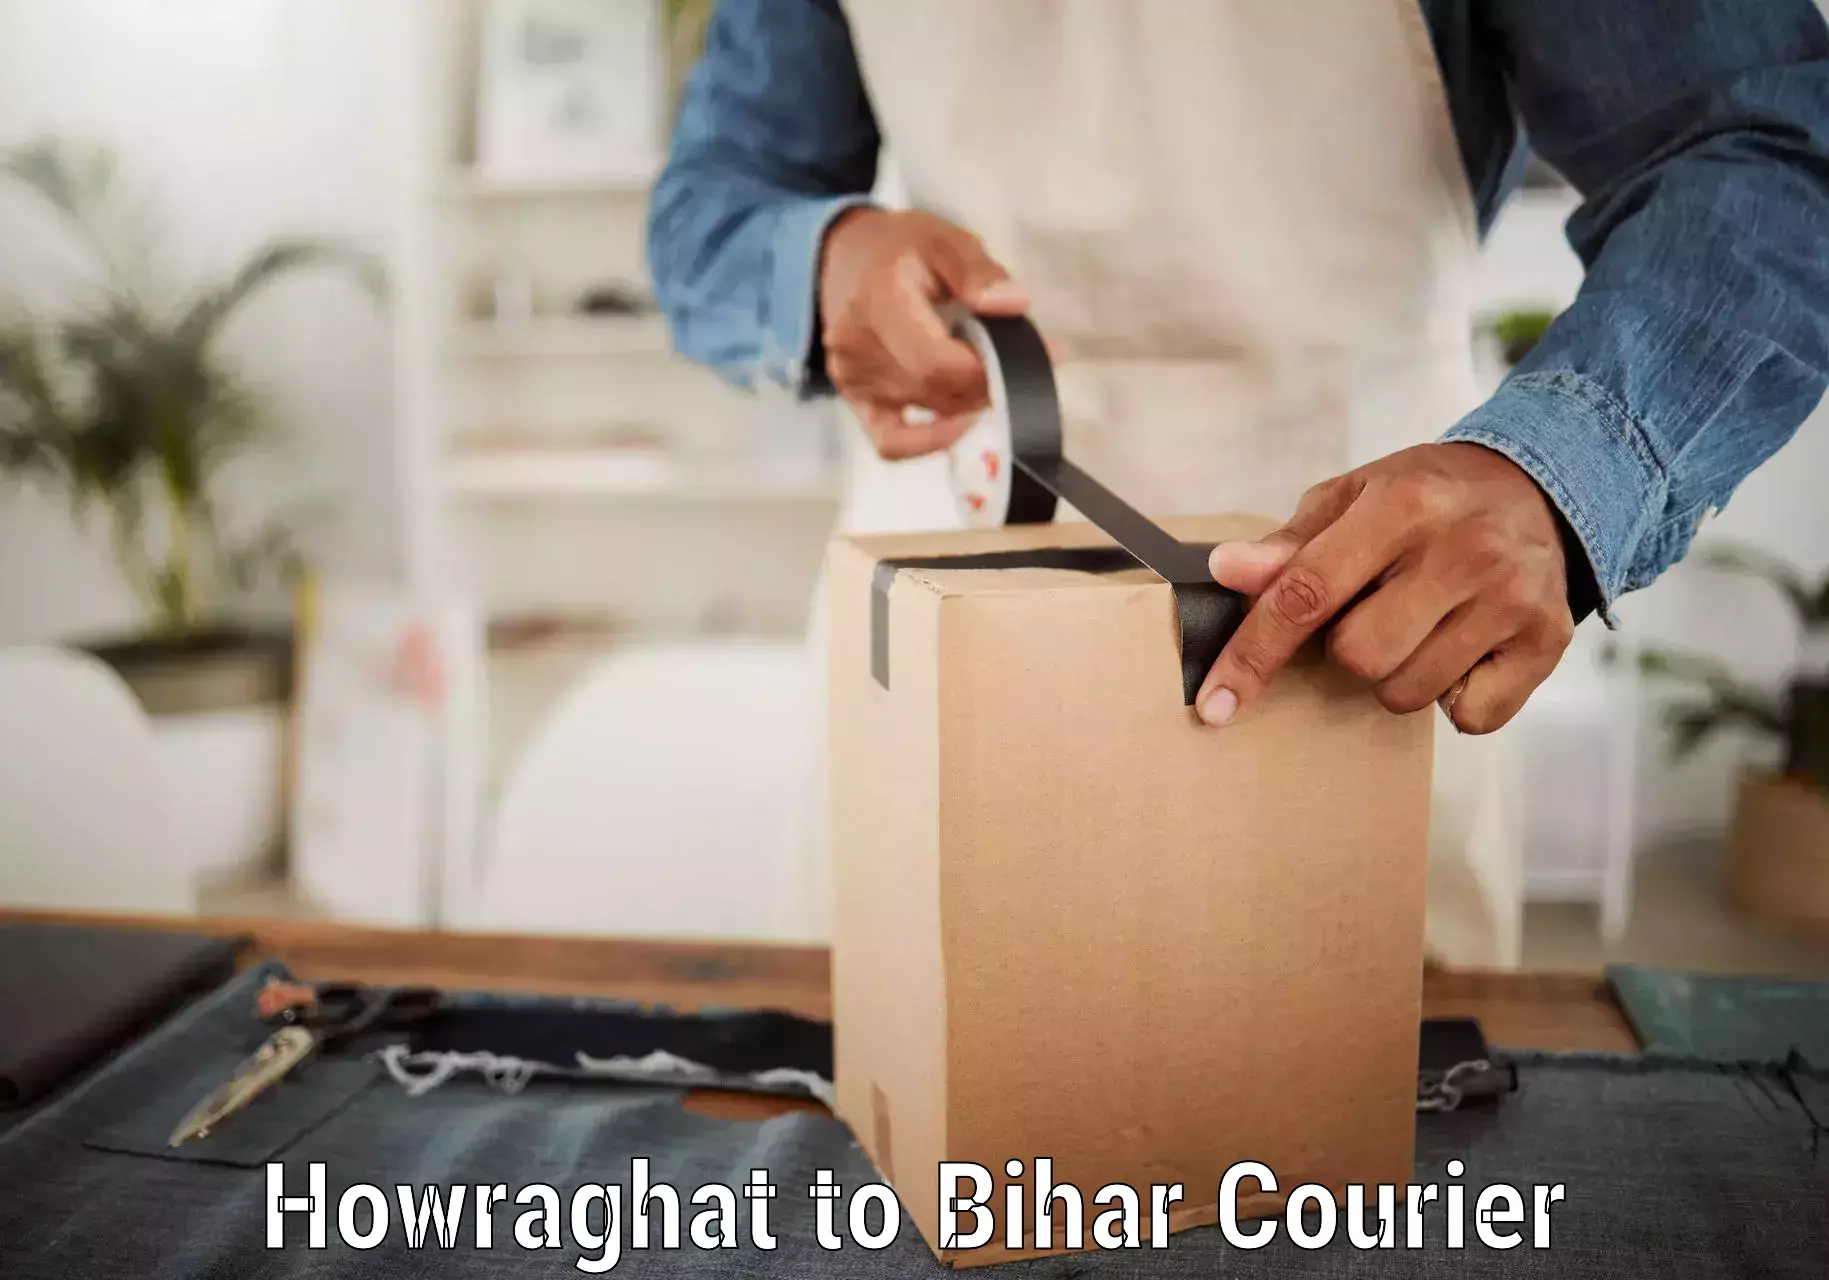 Tailored delivery services Howraghat to Madhubani